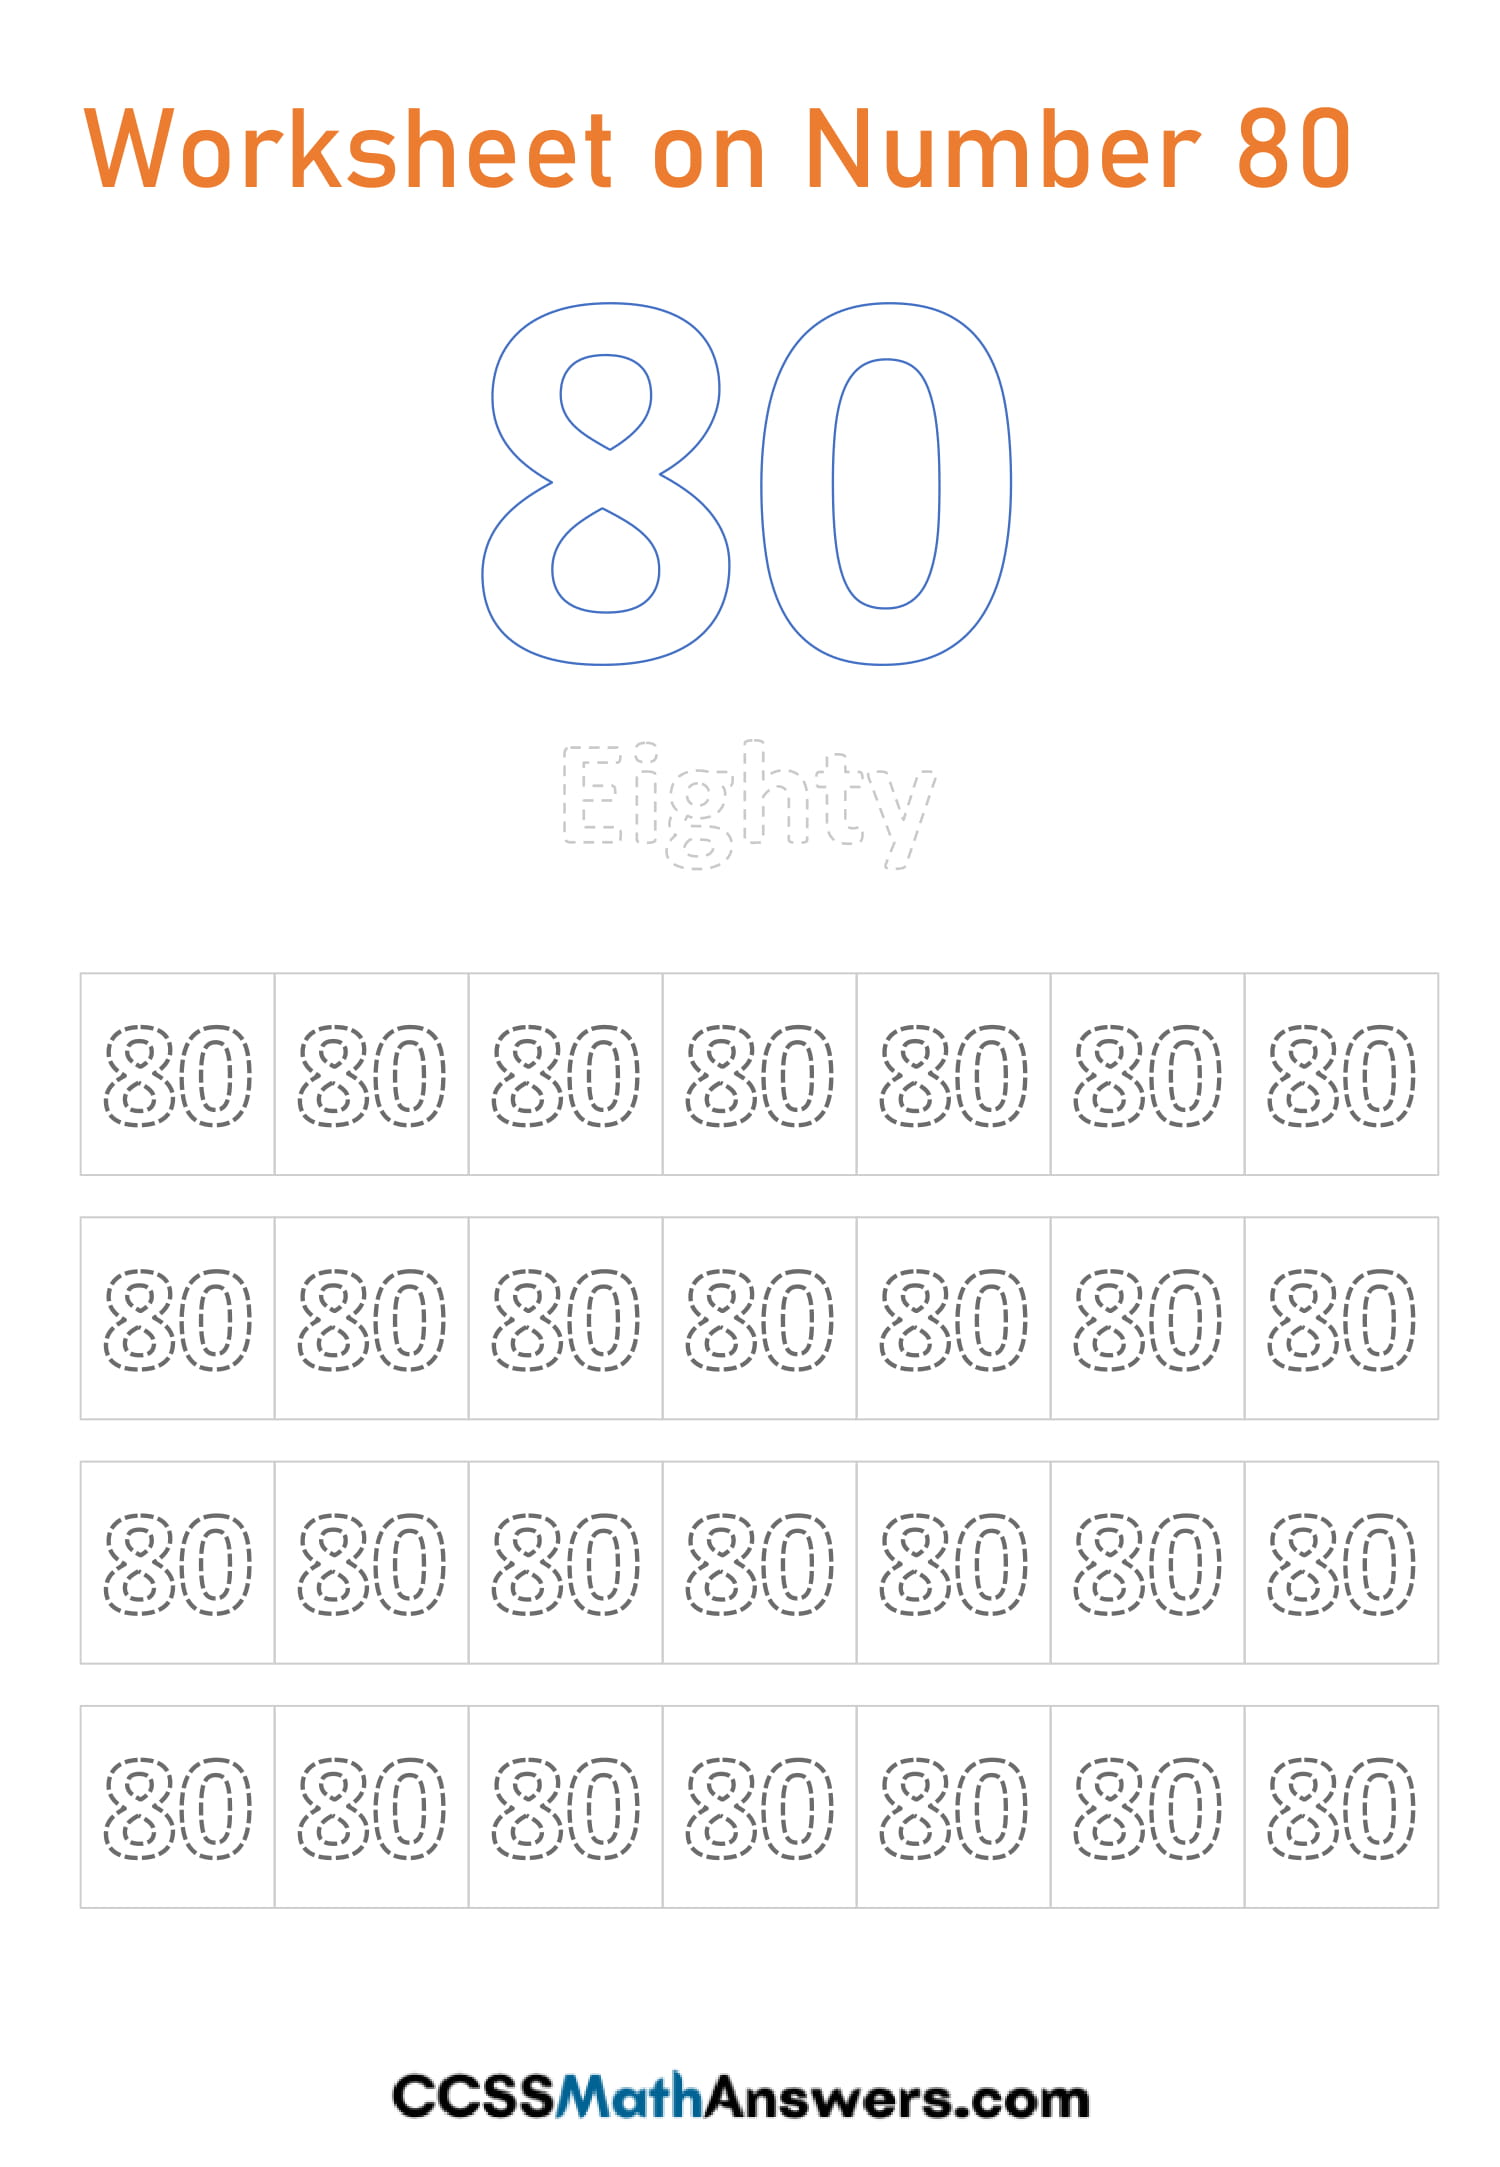 Worksheet On Number 80 Free Printable Math Number 80 Tracing Counting Activities Worksheets 